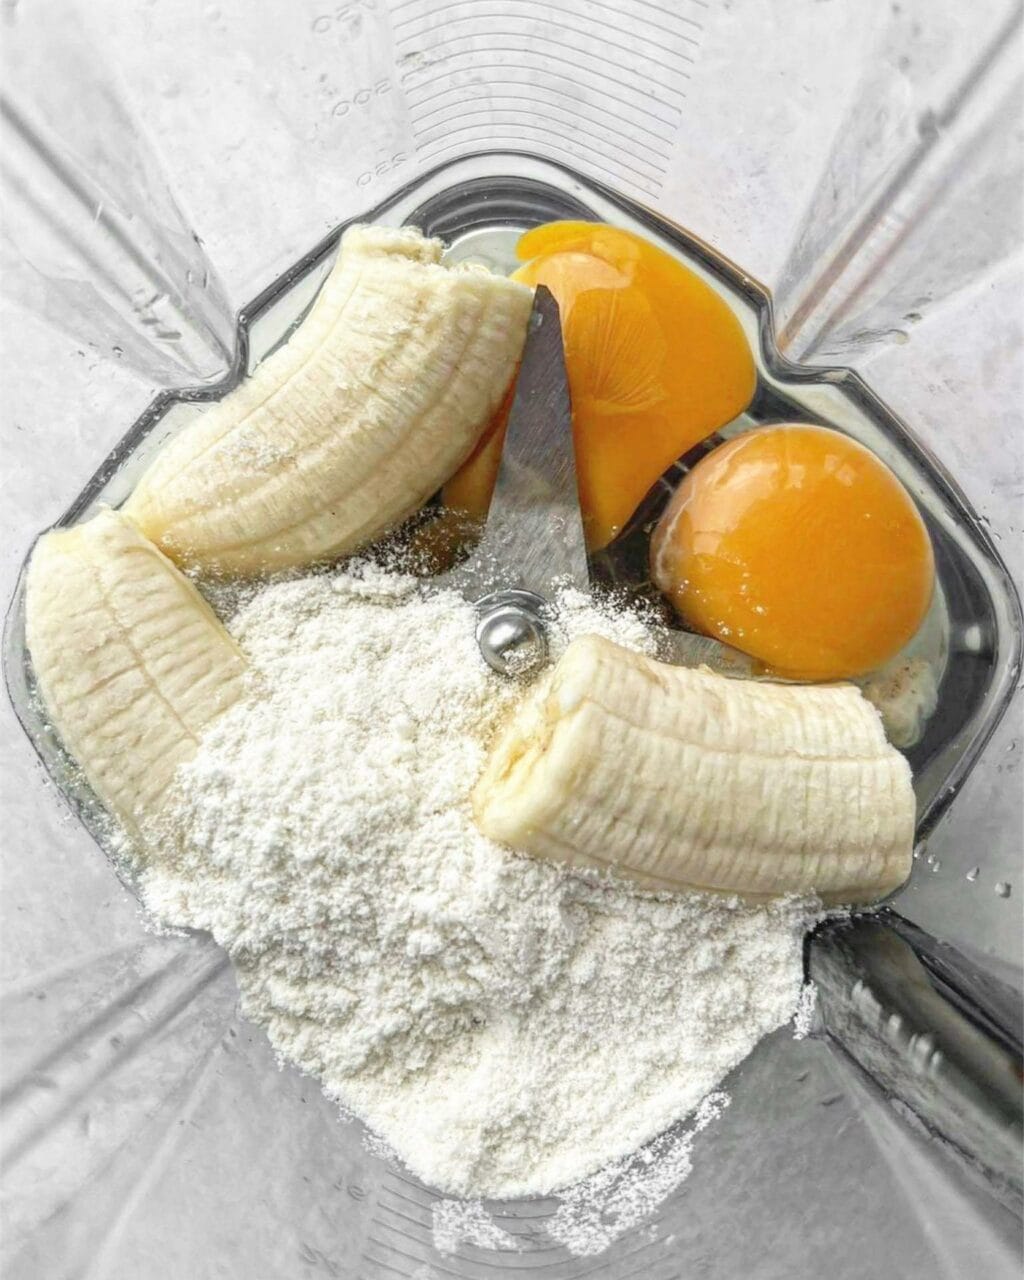 A photo of a banana broken into chunks, 2 eggs and protein powder in a blender.